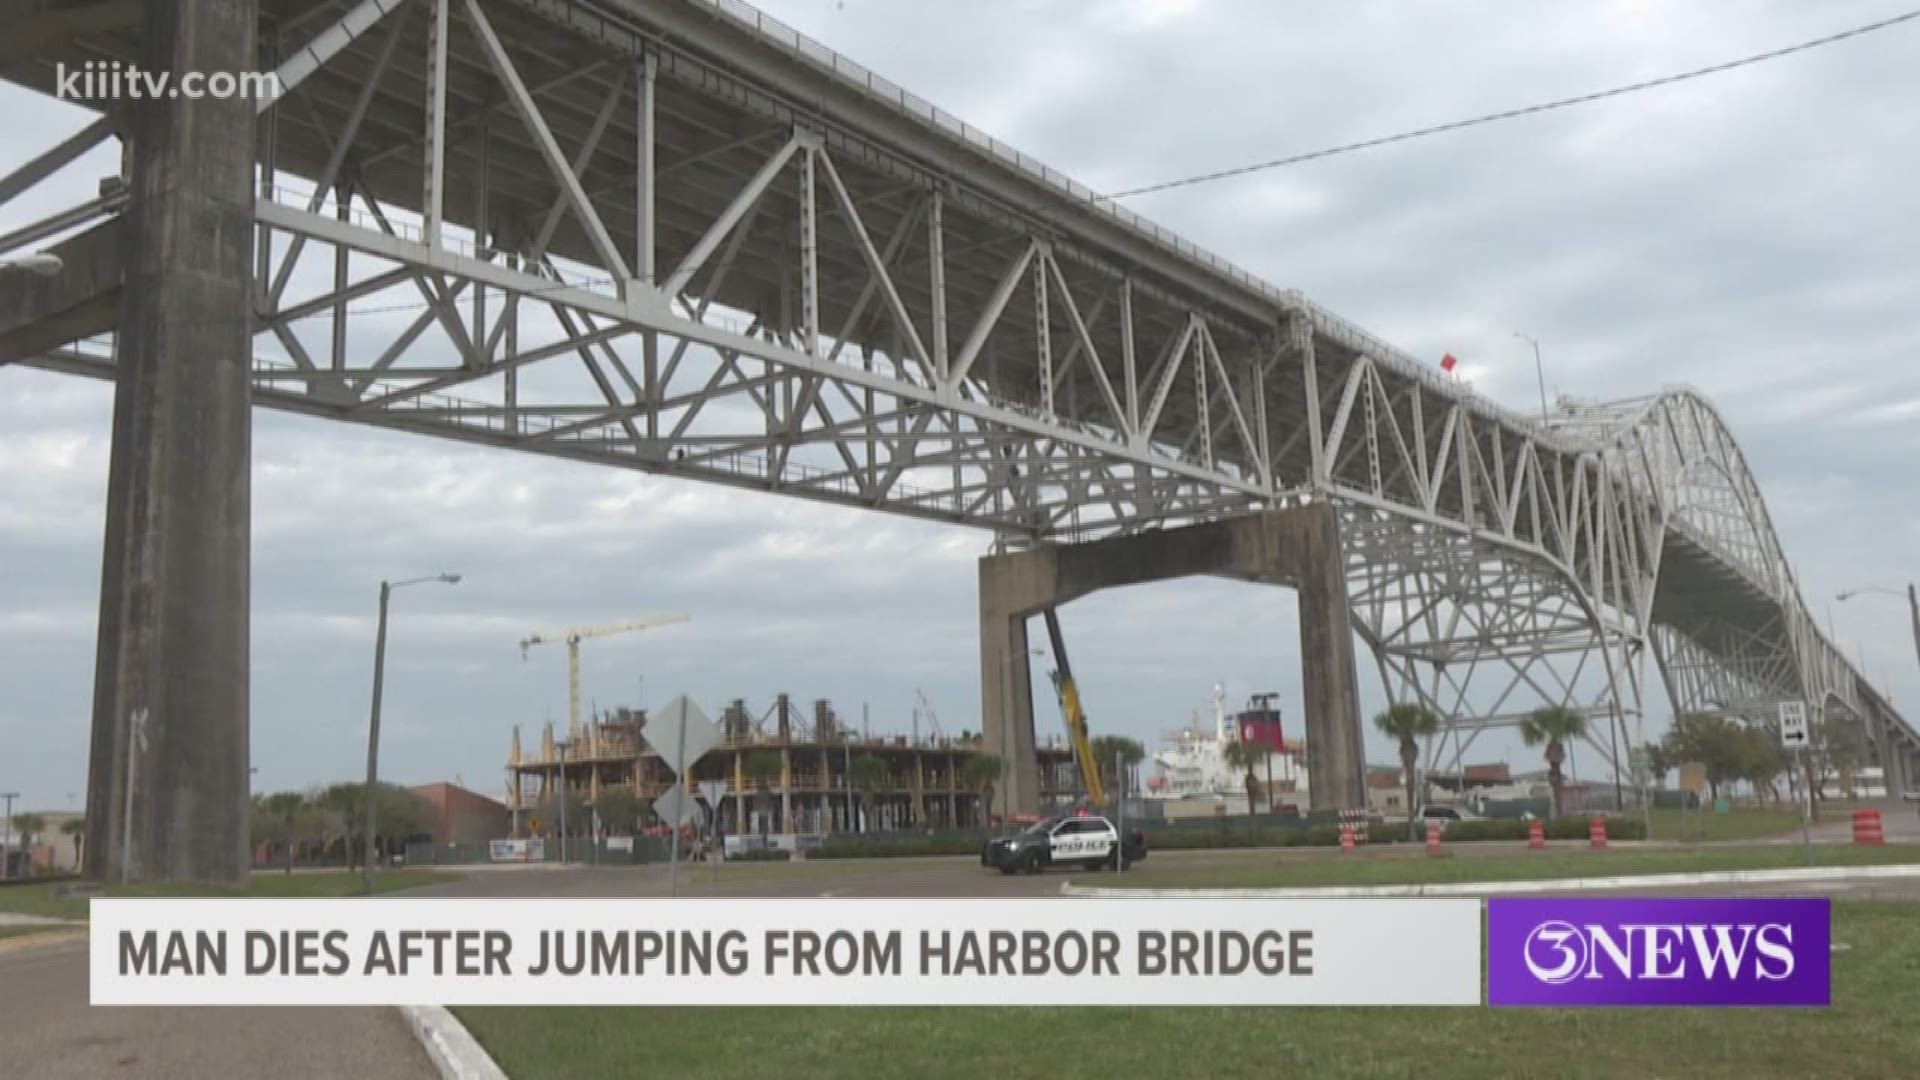 On Monday, emergency crews responded to an area near the Ortiz Center for a man who reportedly jumped from the Harbor Bridge